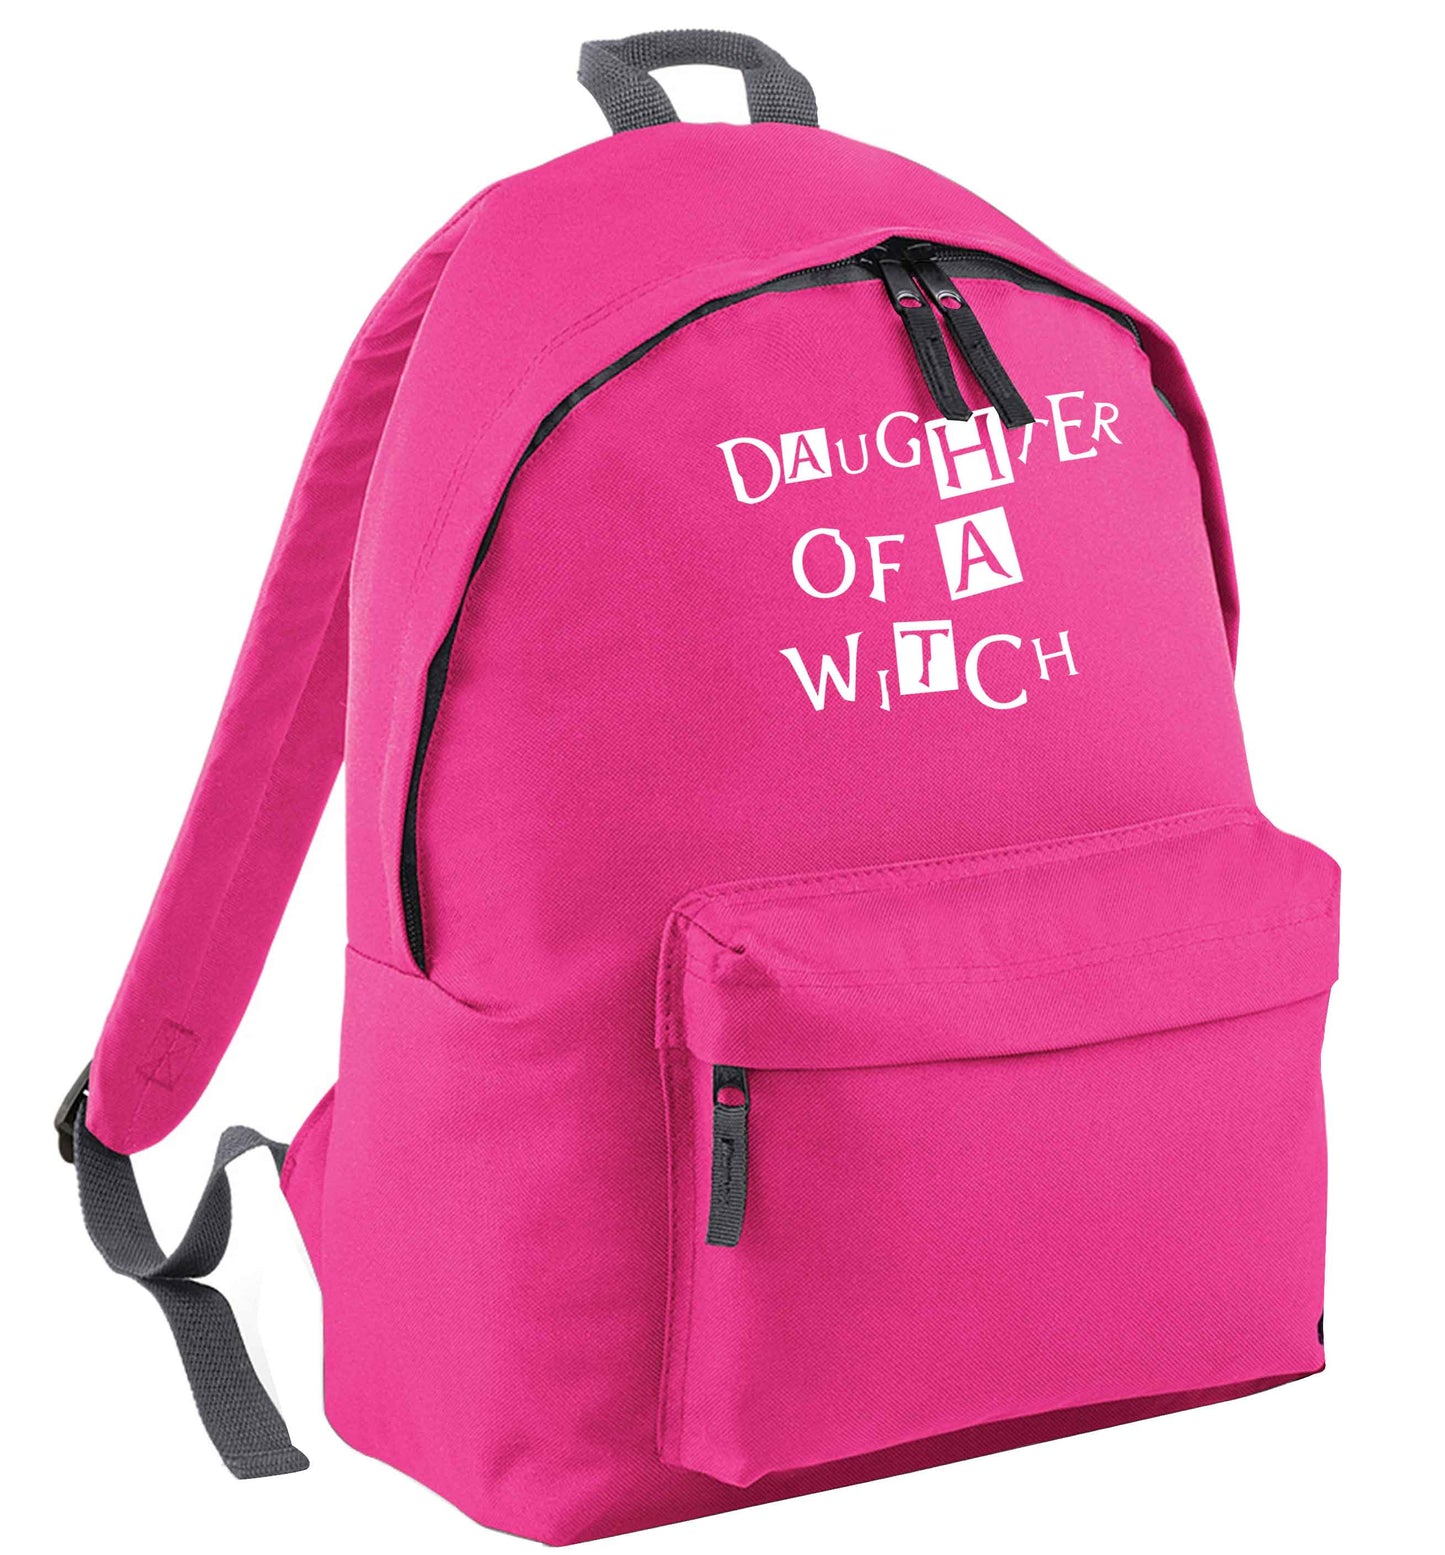 Daughter of a witch pink adults backpack